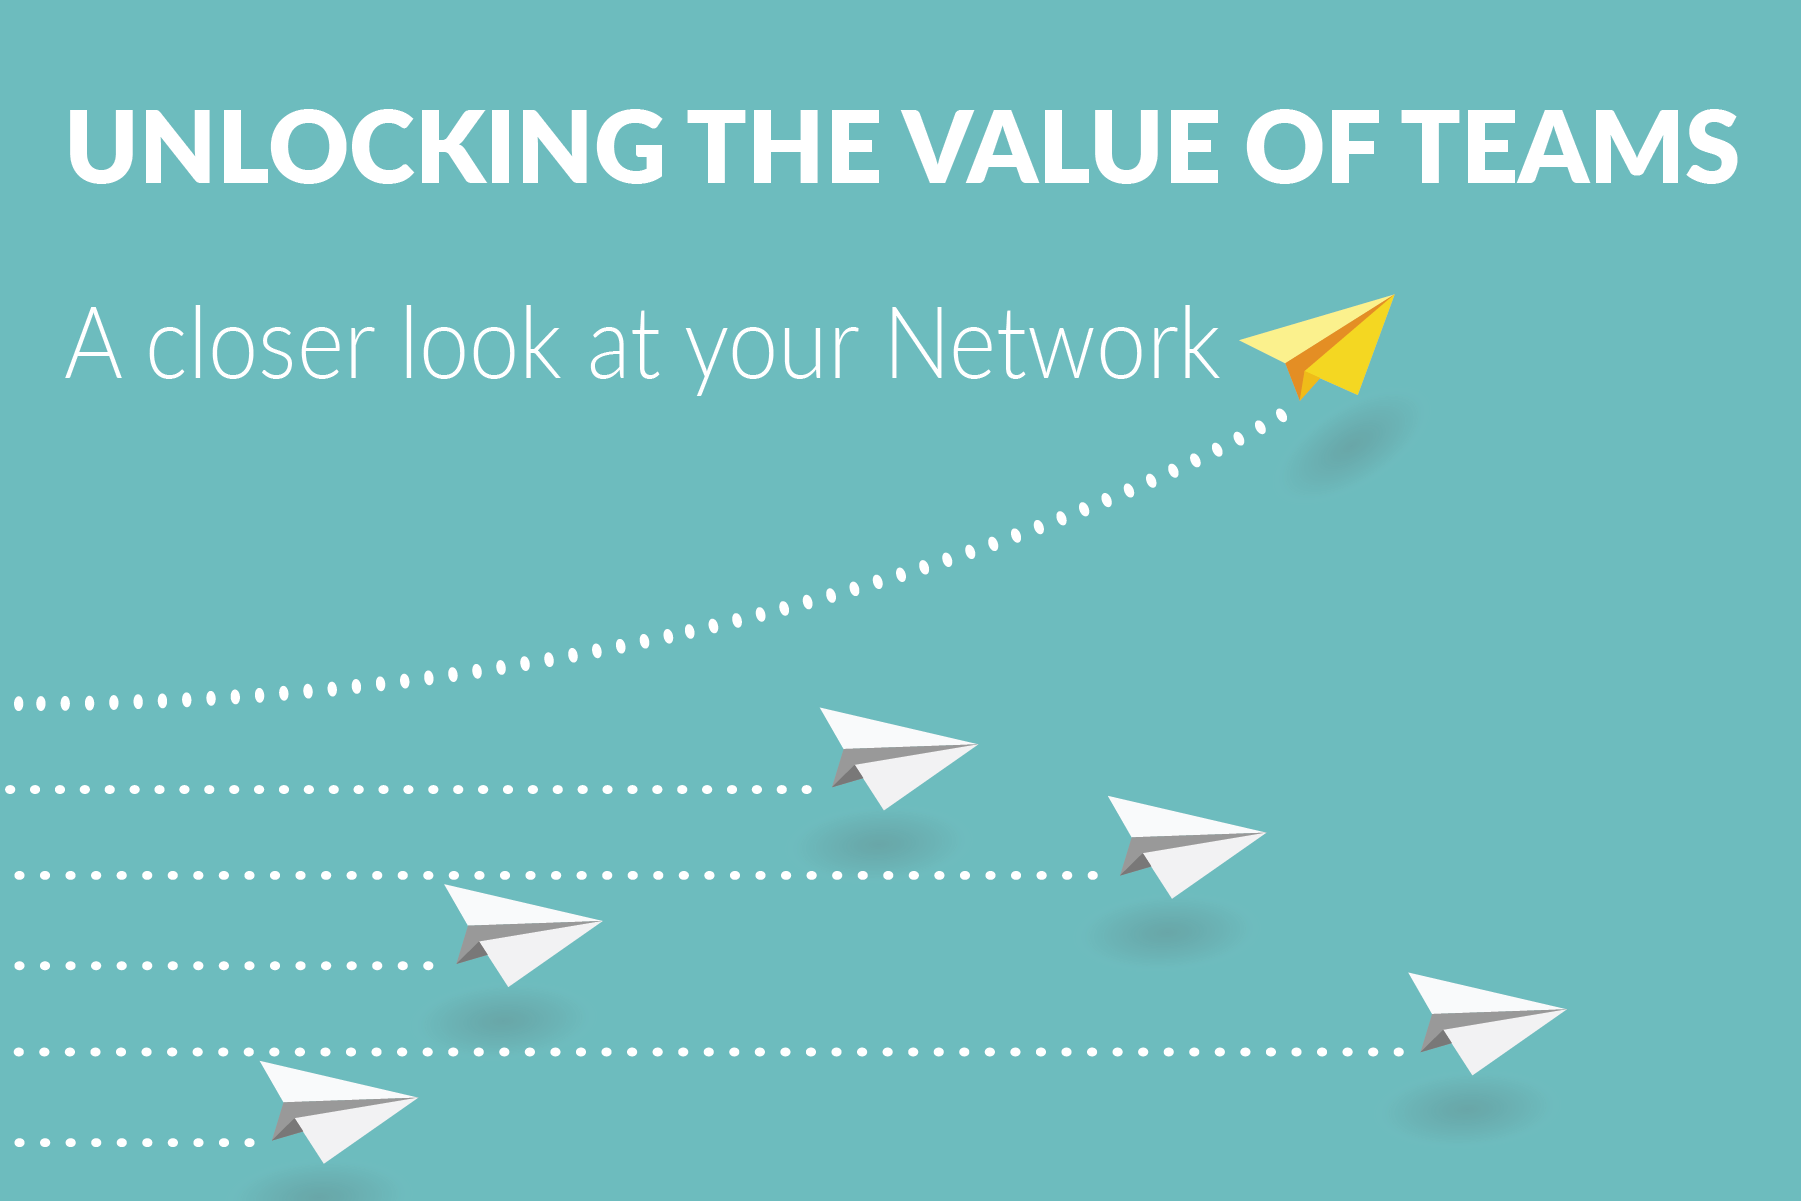 Unlocking the Value of Teams | A Closer Look at Network